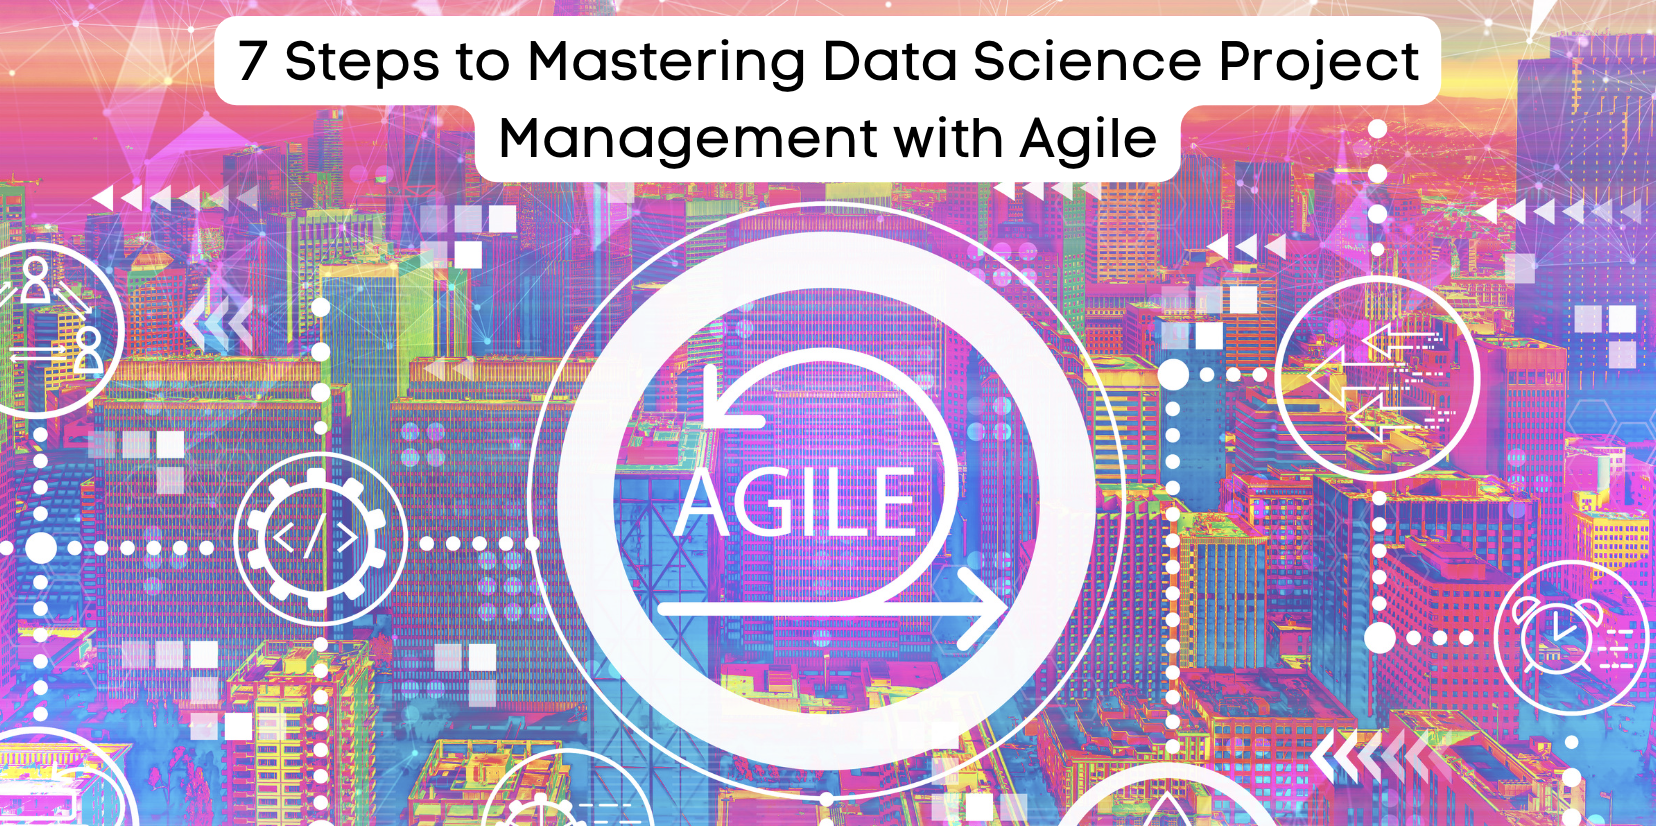 7 Steps to Mastering Data Science Project Management with Agile